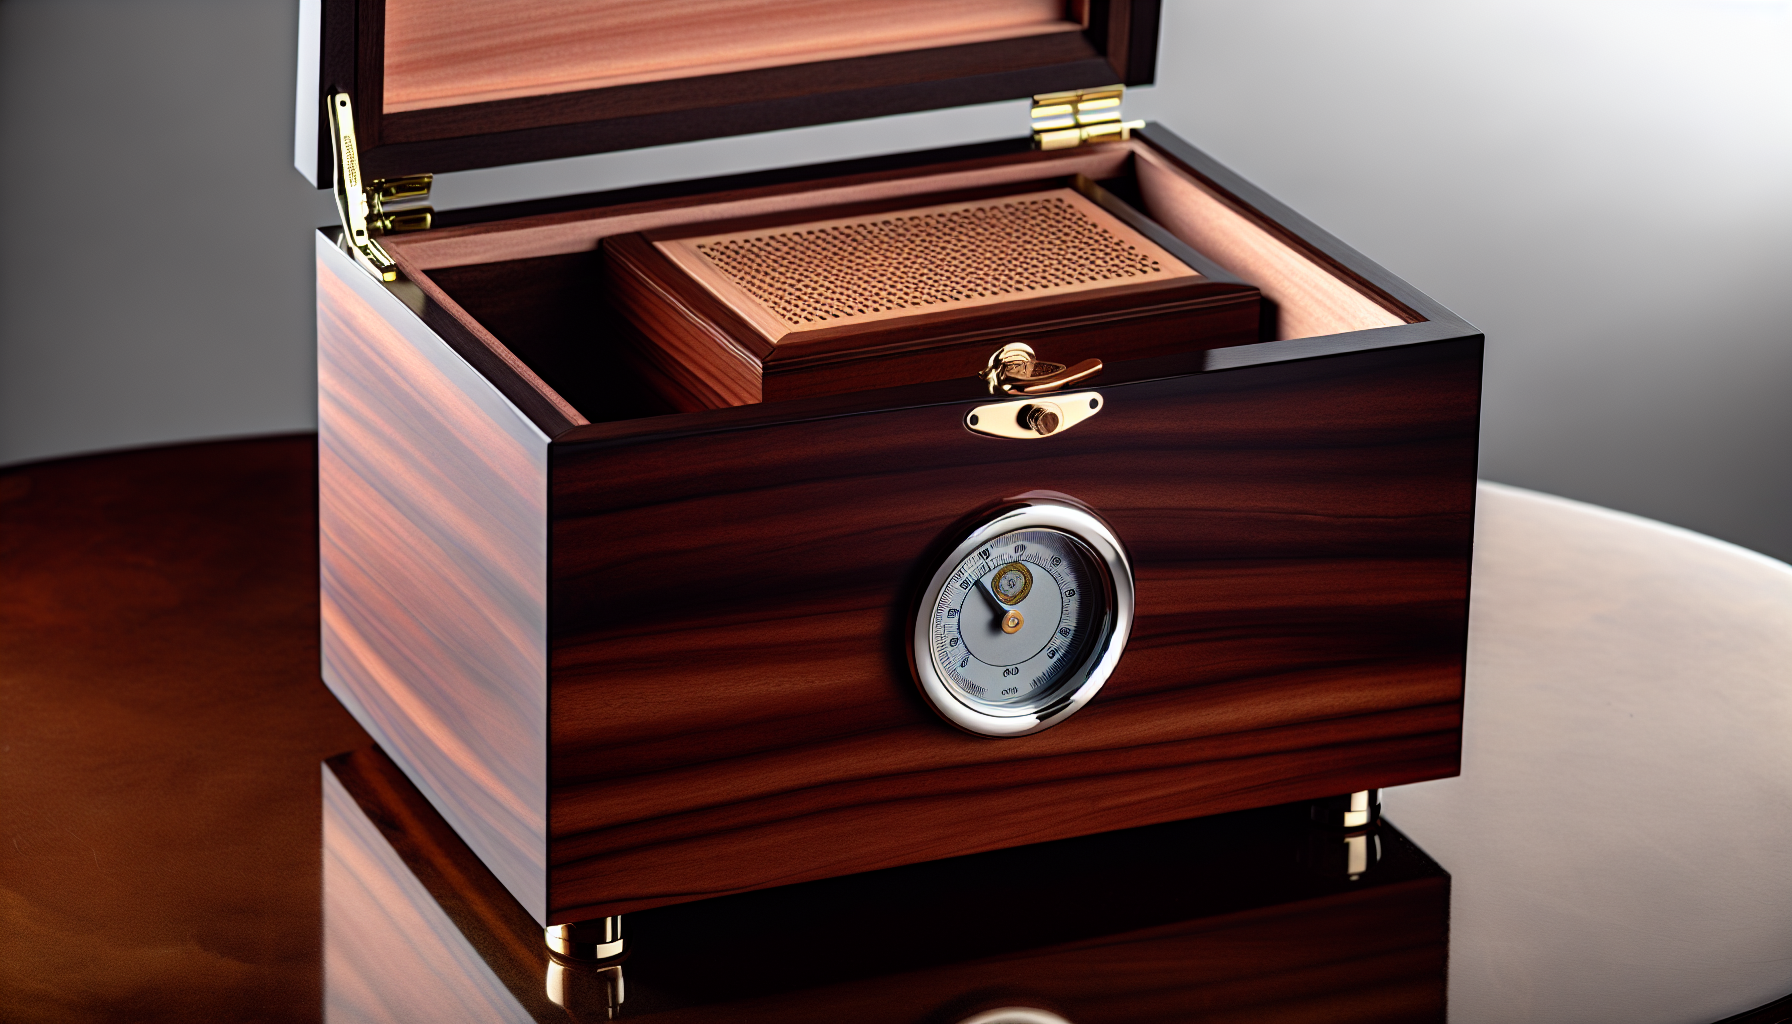 Essential features of a high-quality humidor chest